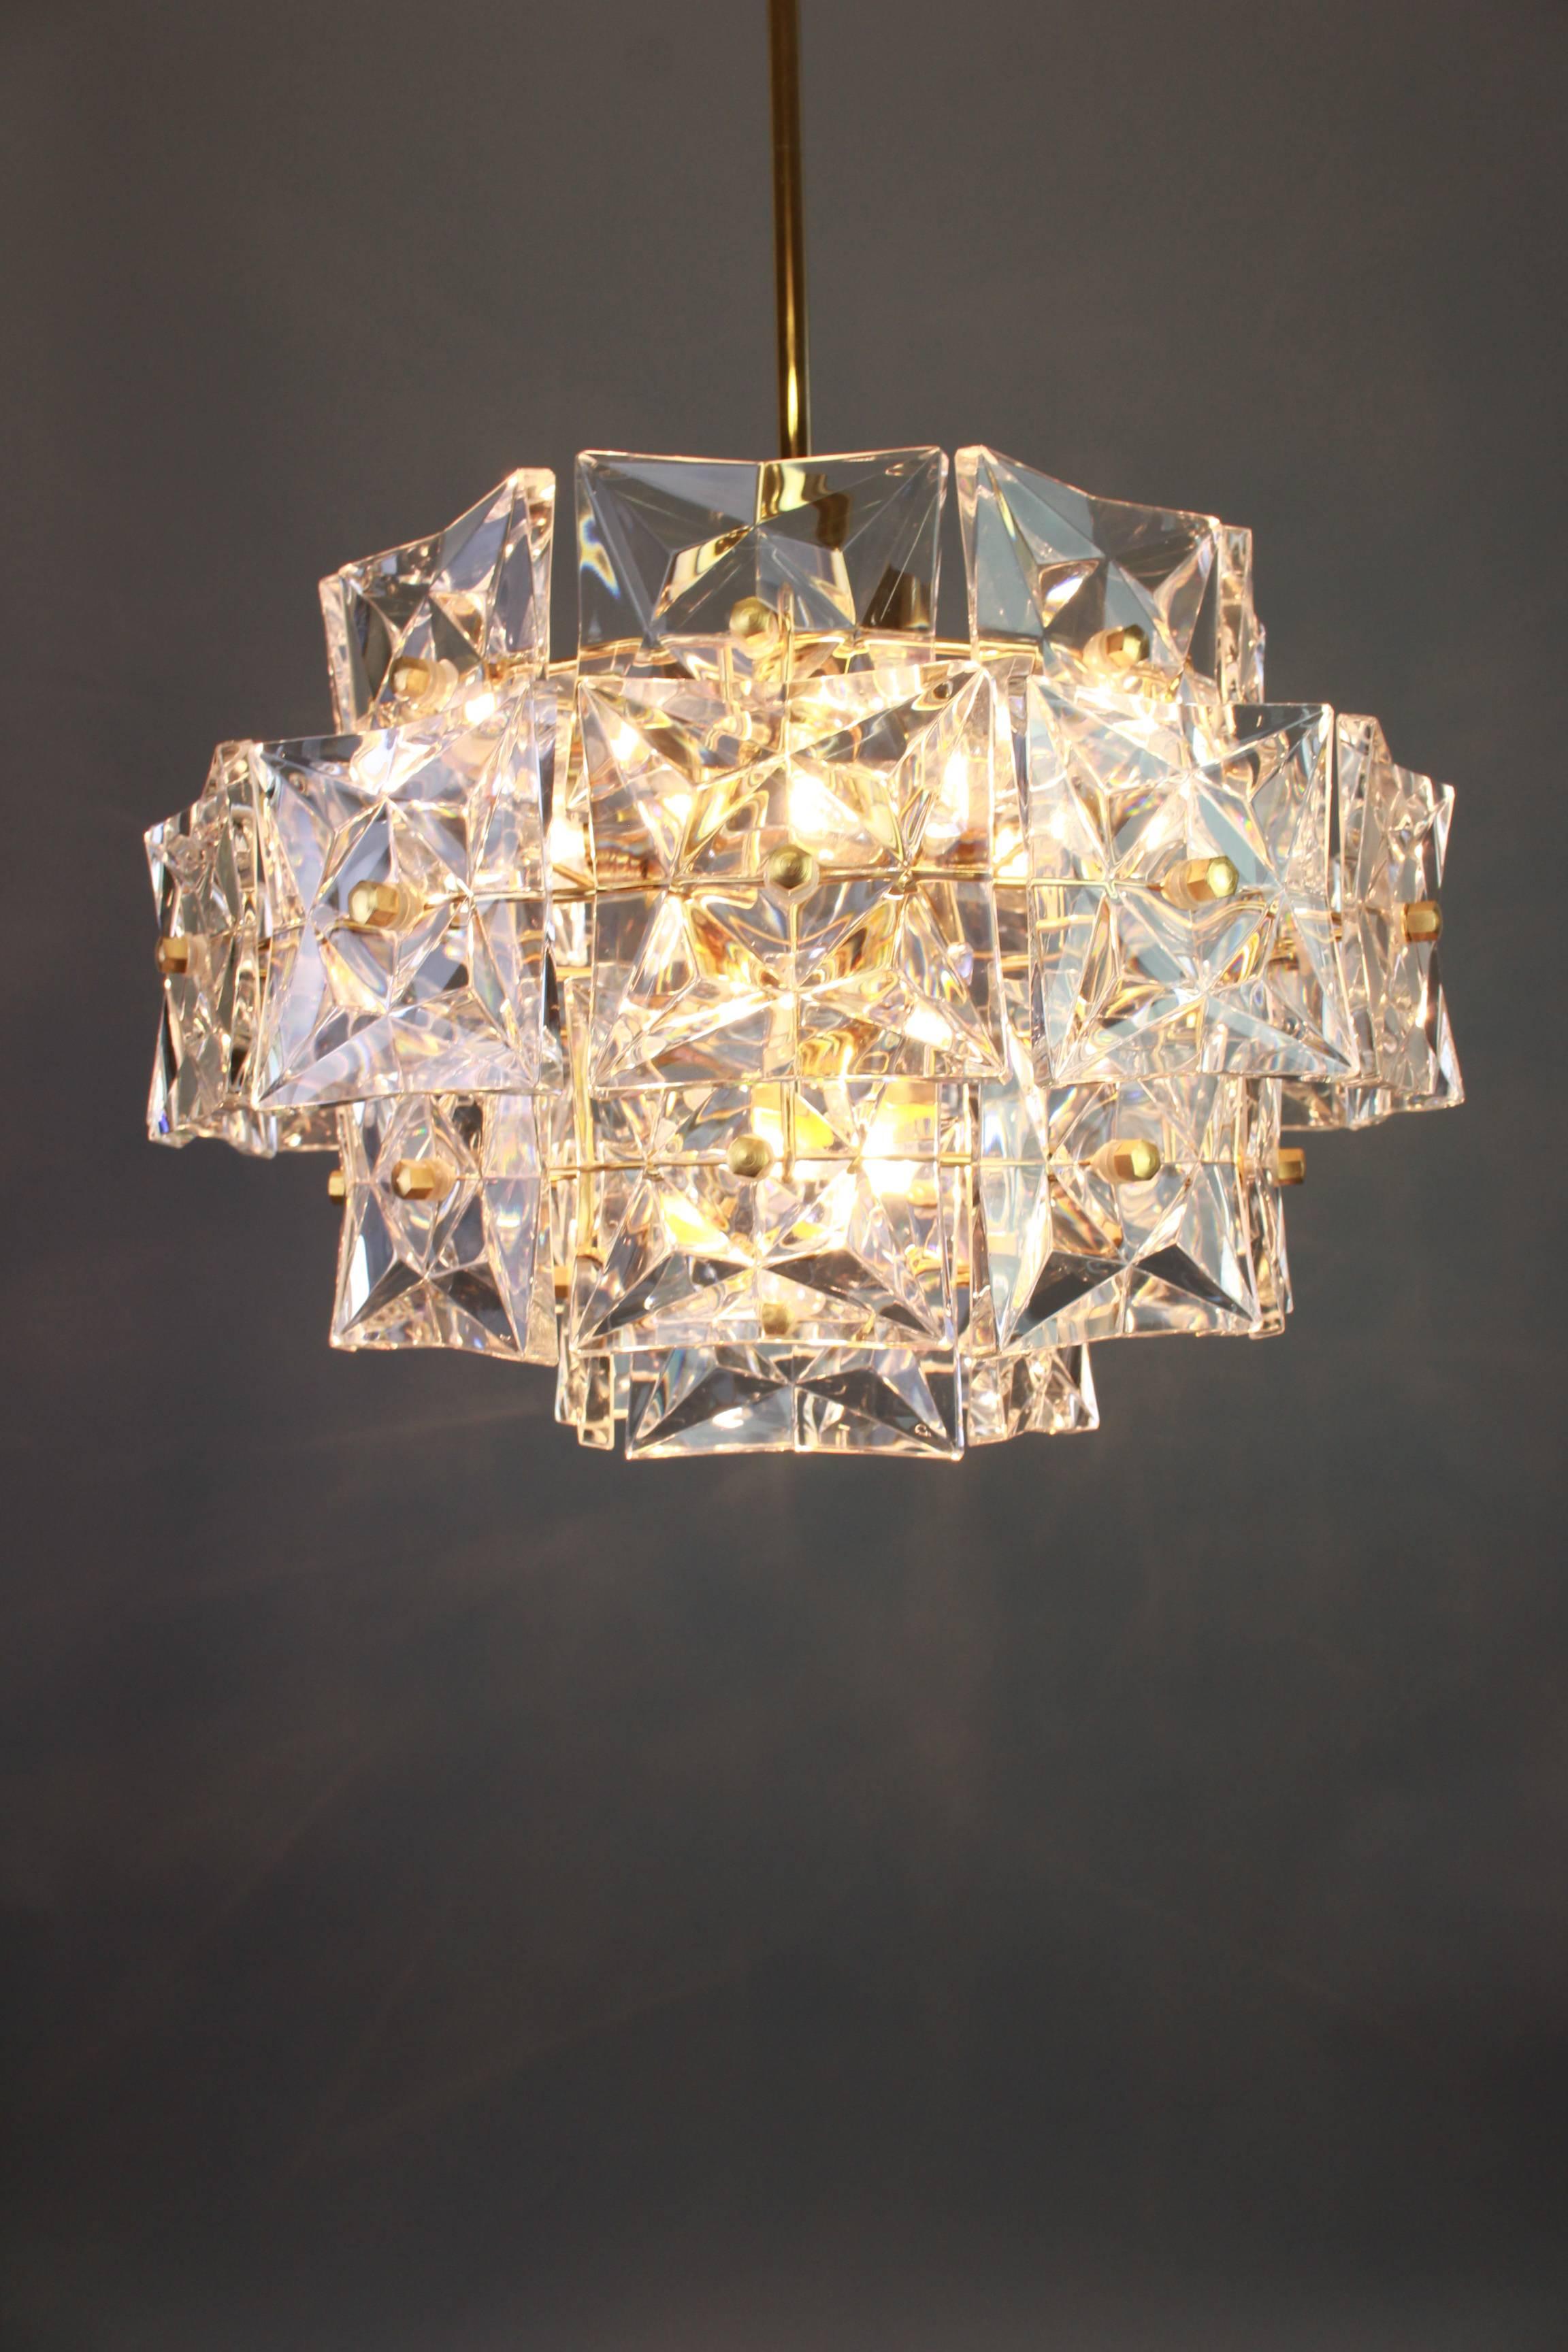 A stunning four-tier chandelier by Kinkeldey, Germany, manufactured in circa 1970-1979. A handmade and high-quality piece. The ceiling fixture and the frame are made of brass and have four rings with lots of faceted crystal glass elements.

High